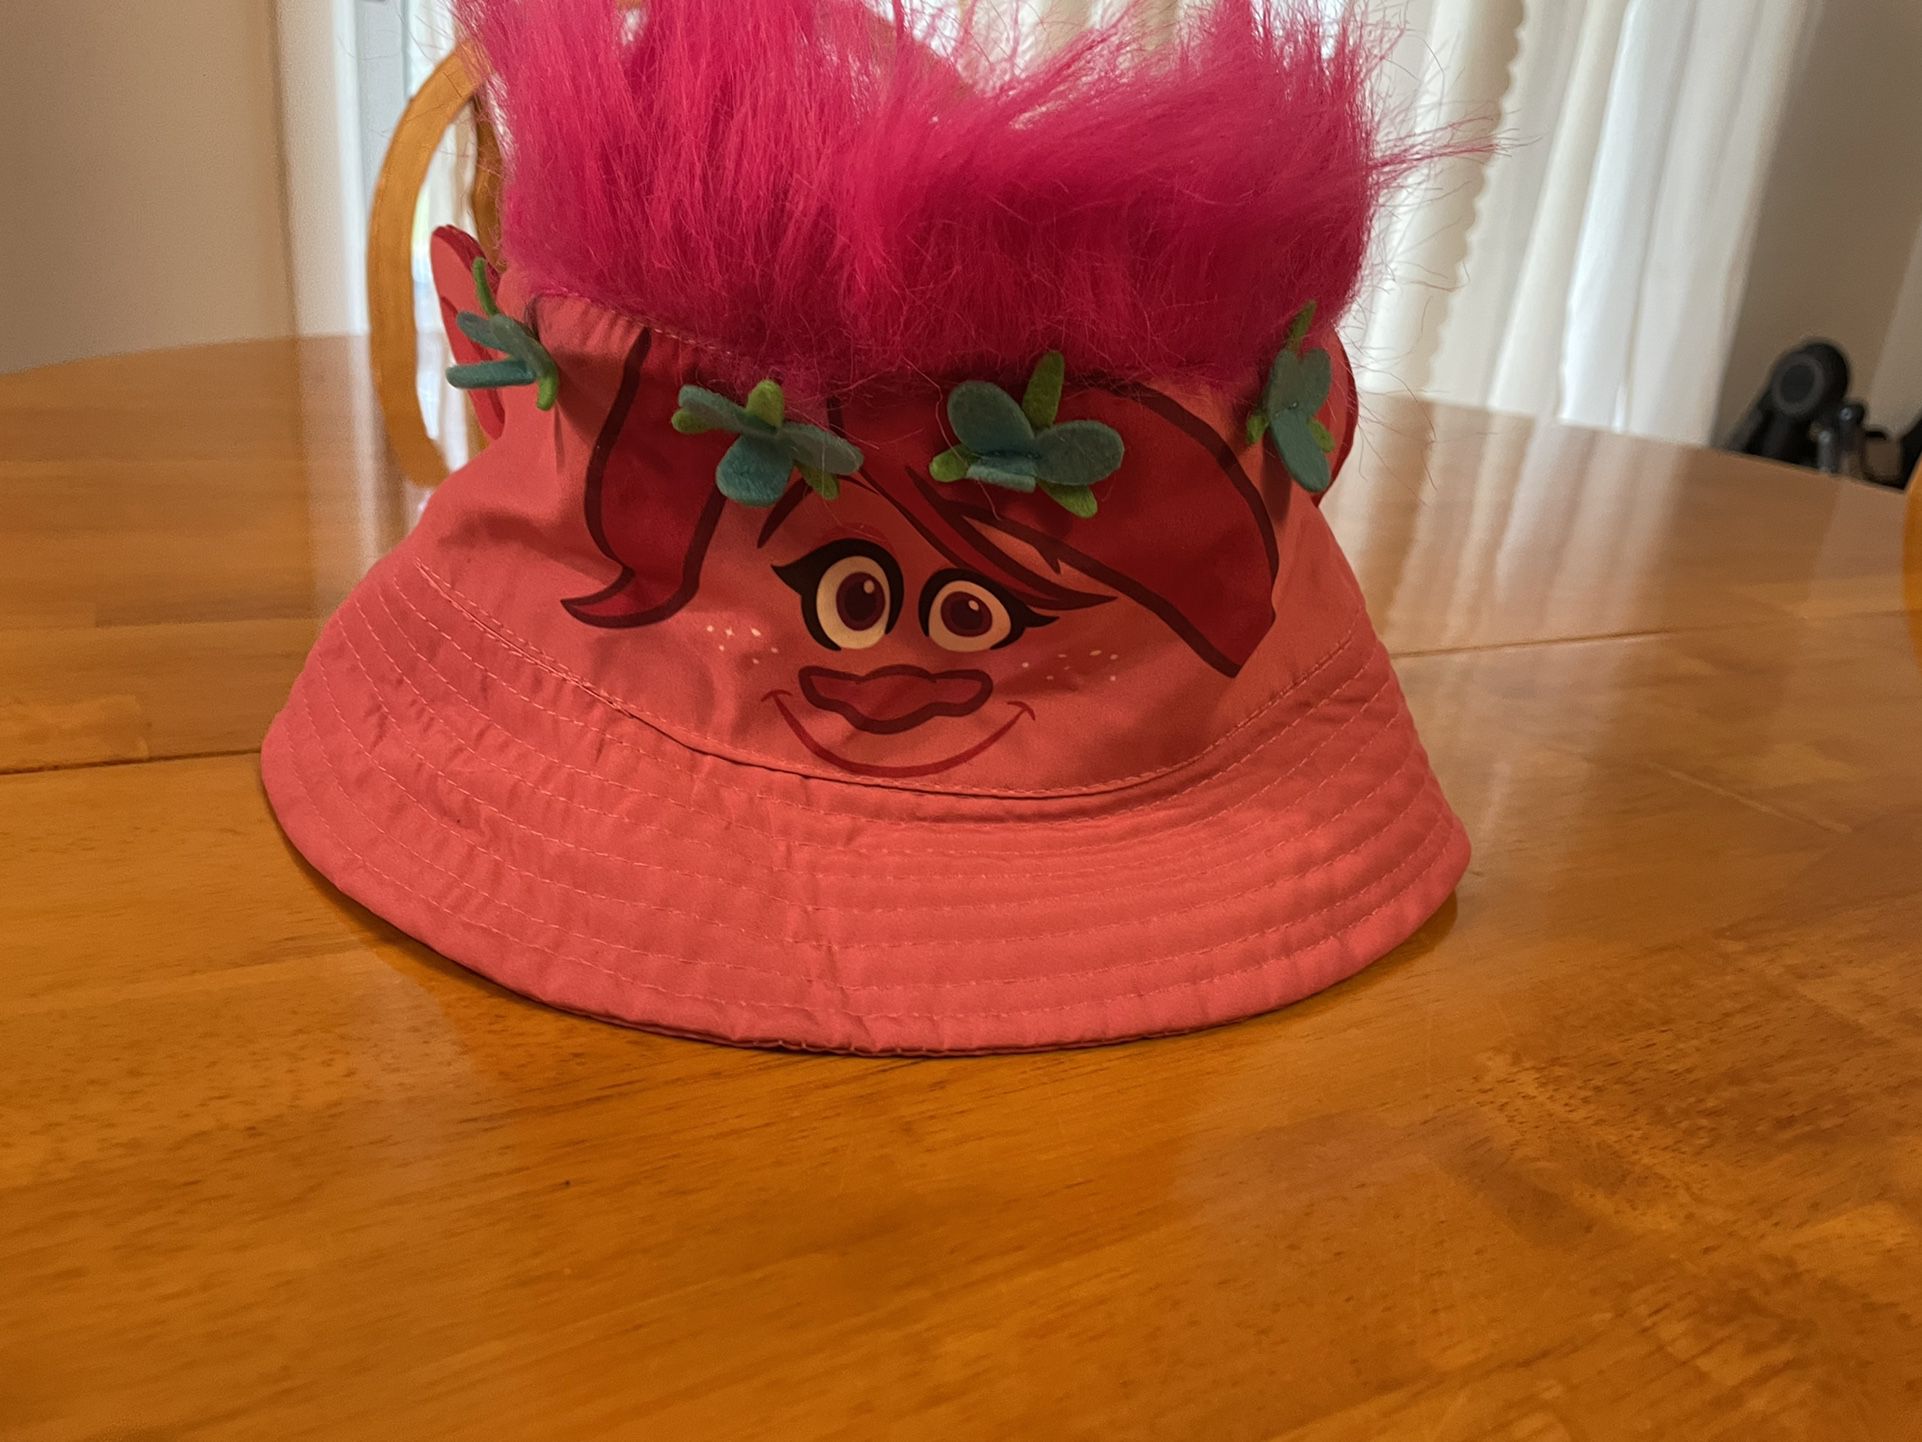 Reduced! Brand New with Tags, Dreamworks Toddler Girl Troll Hat